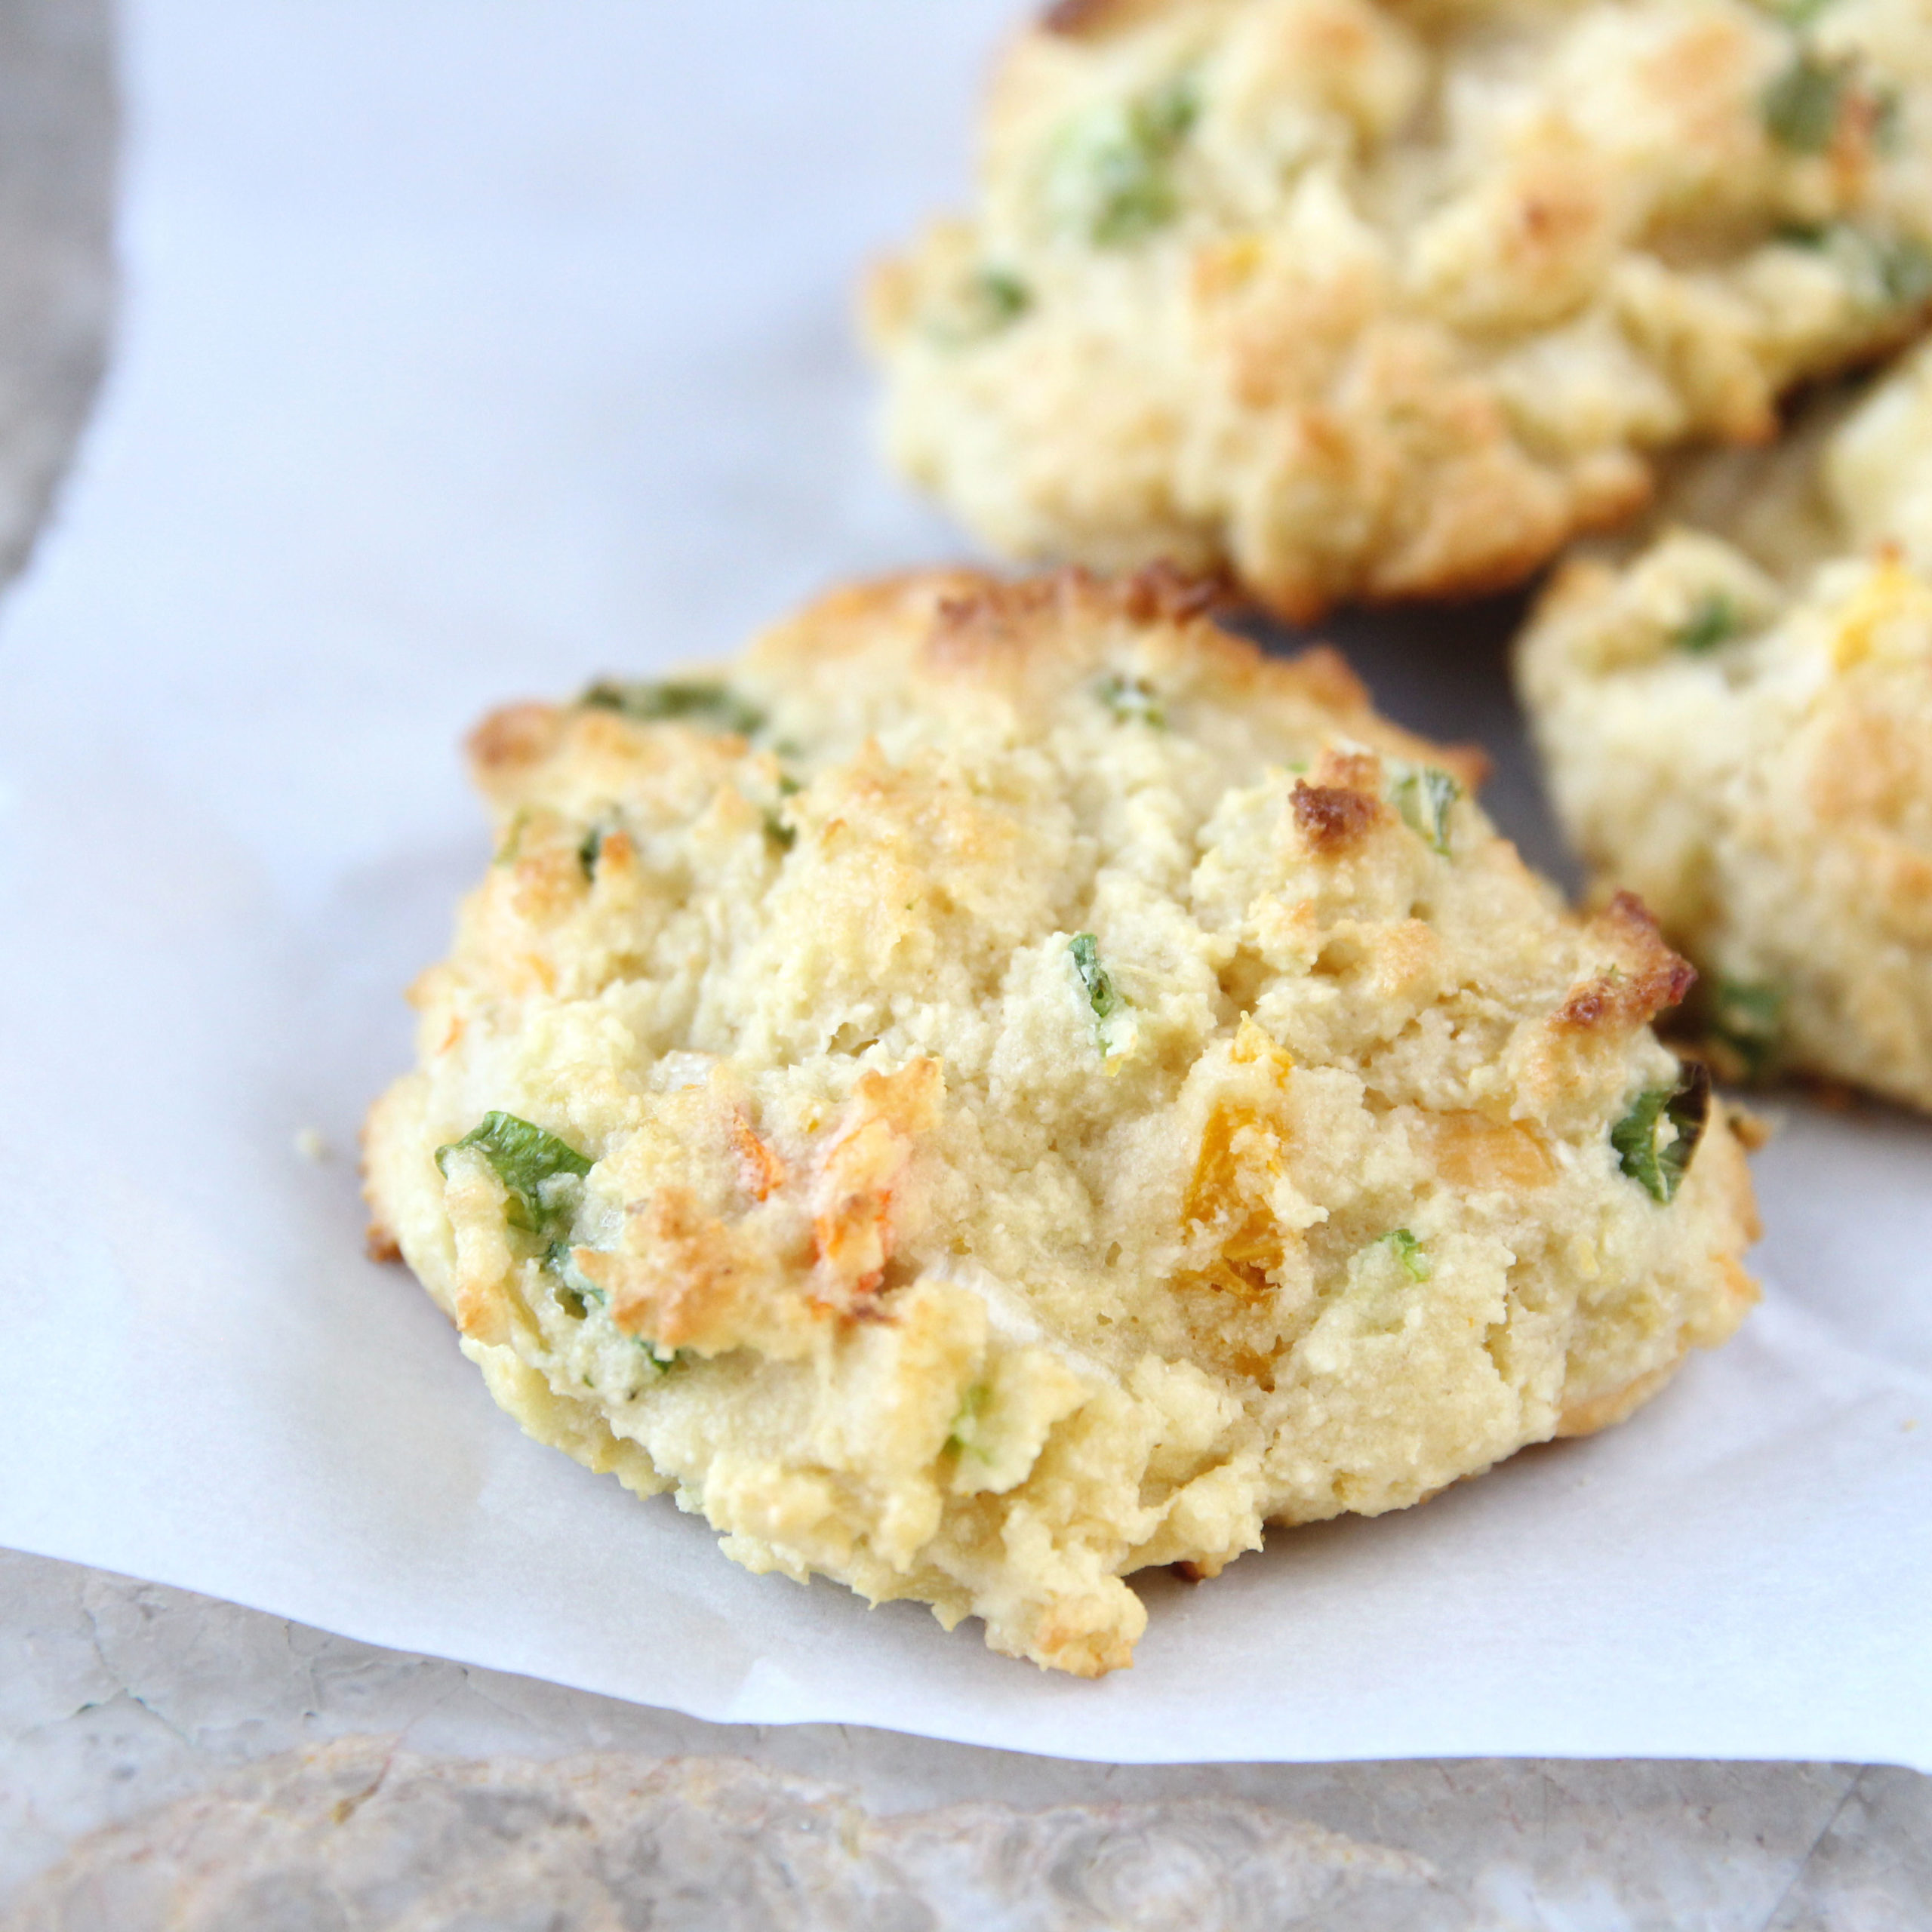 How to Make Gluten-Free Cheddar Drop Biscuits made with Cauliflower - drop biscuits